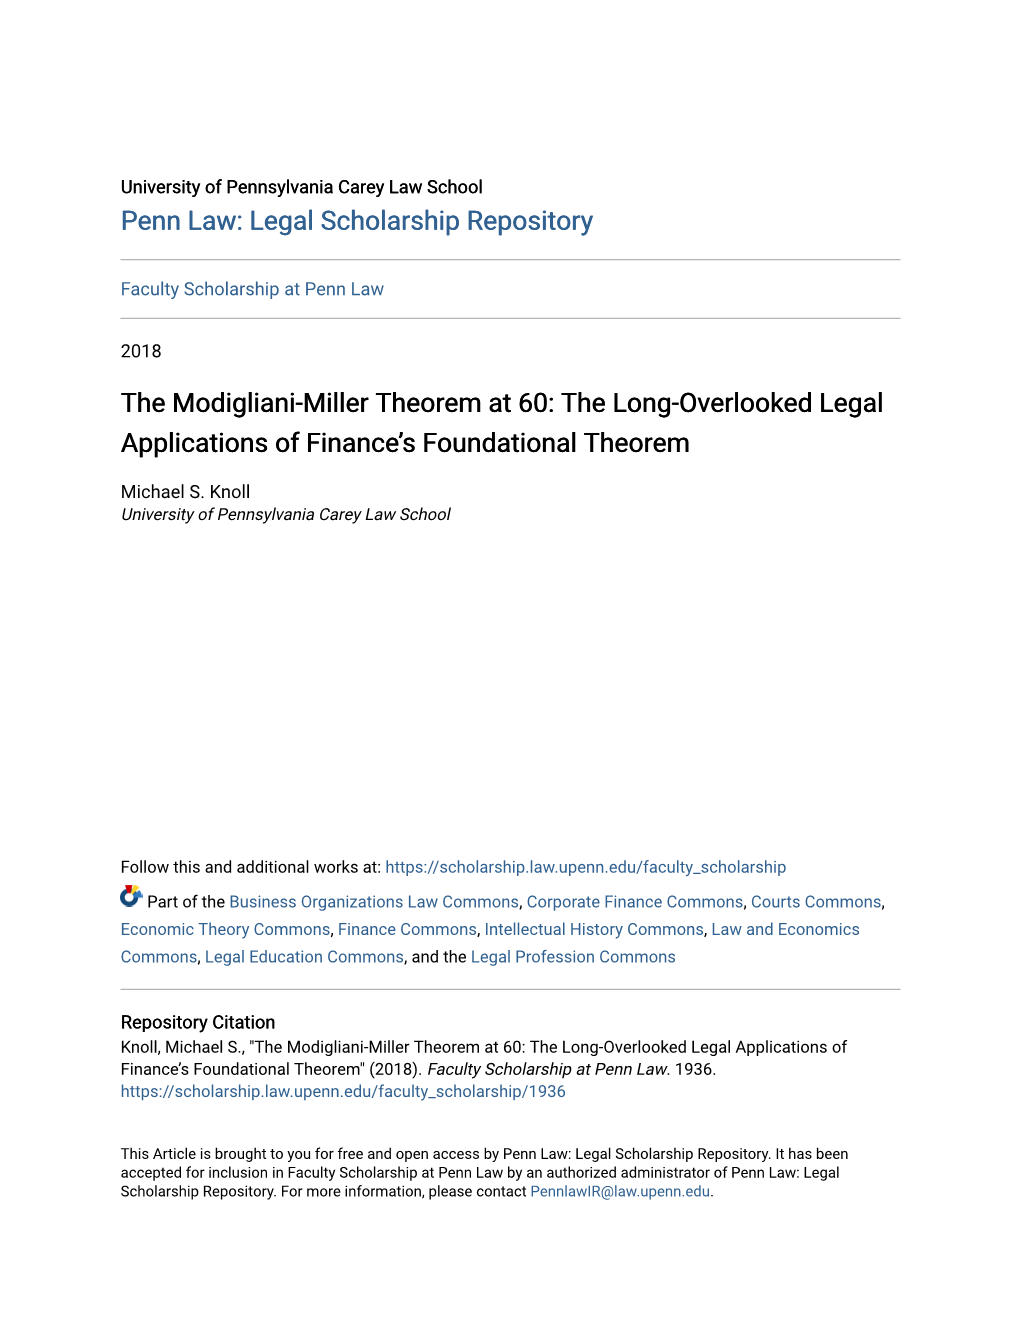 The Modigliani-Miller Theorem at 60: the Long-Overlooked Legal Applications of Finance’S Foundational Theorem